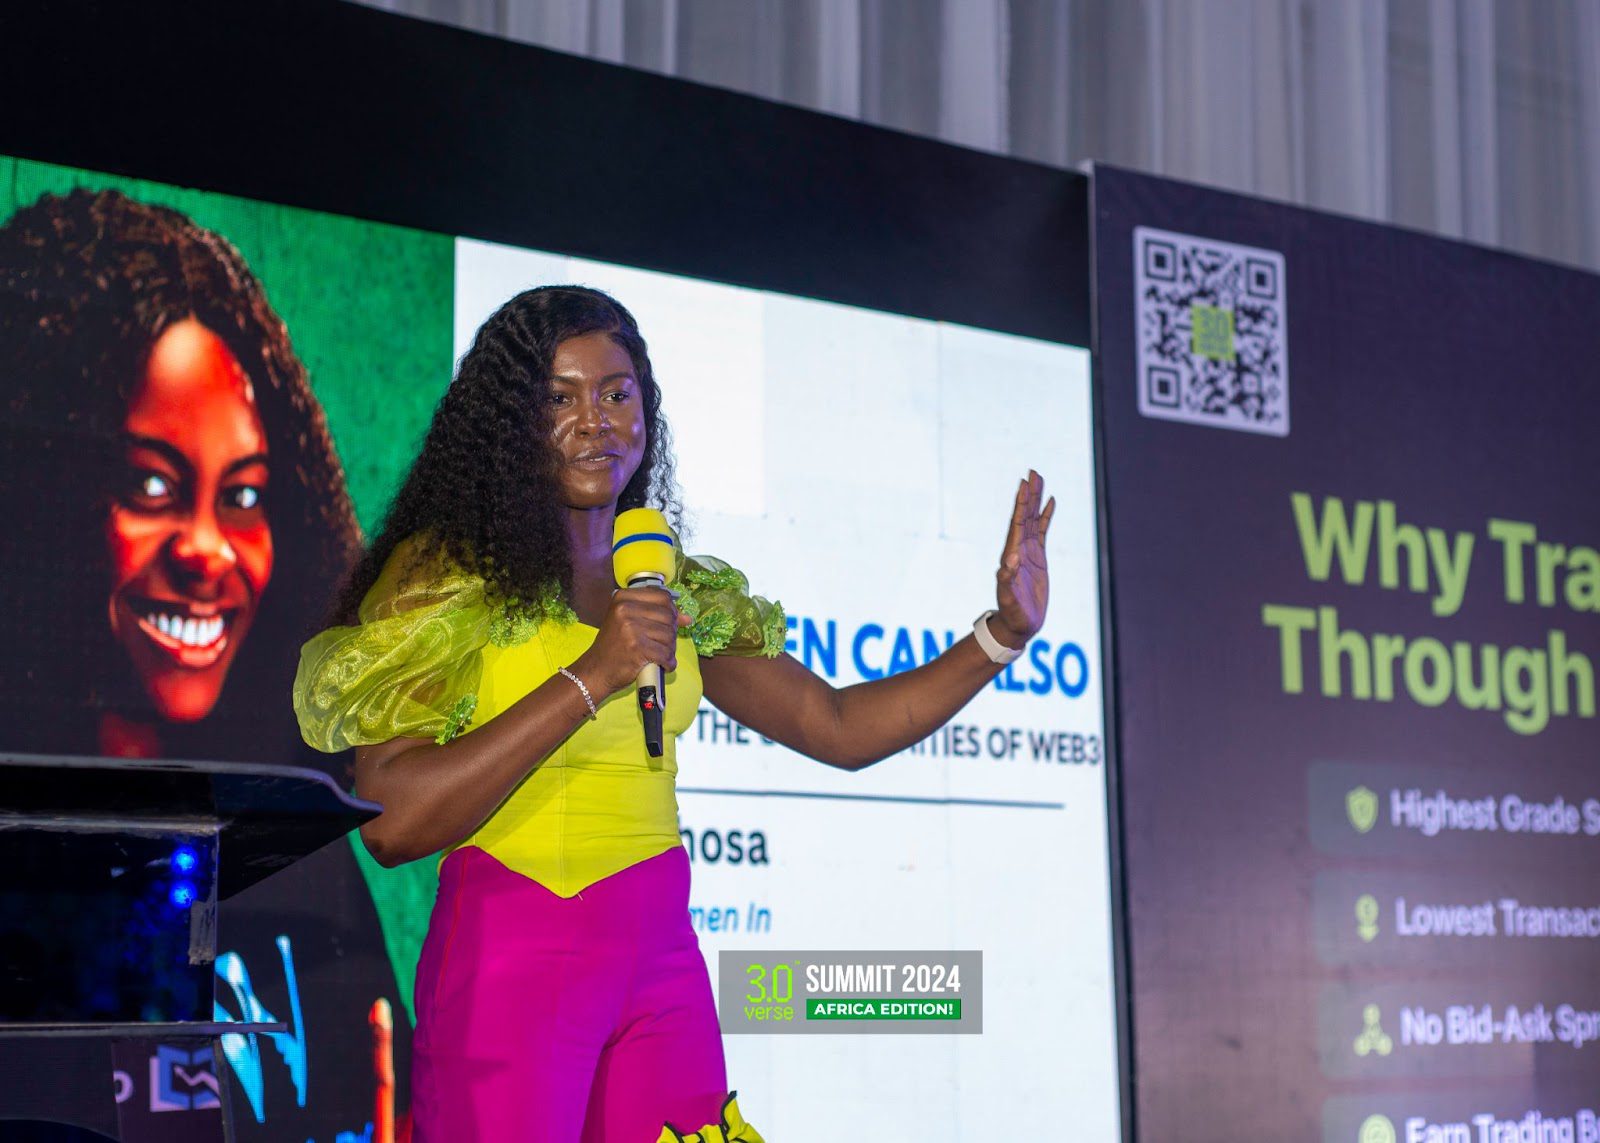 Sarah Idahosa is also a keynote speaker at many events in the Web3 ecosystem.